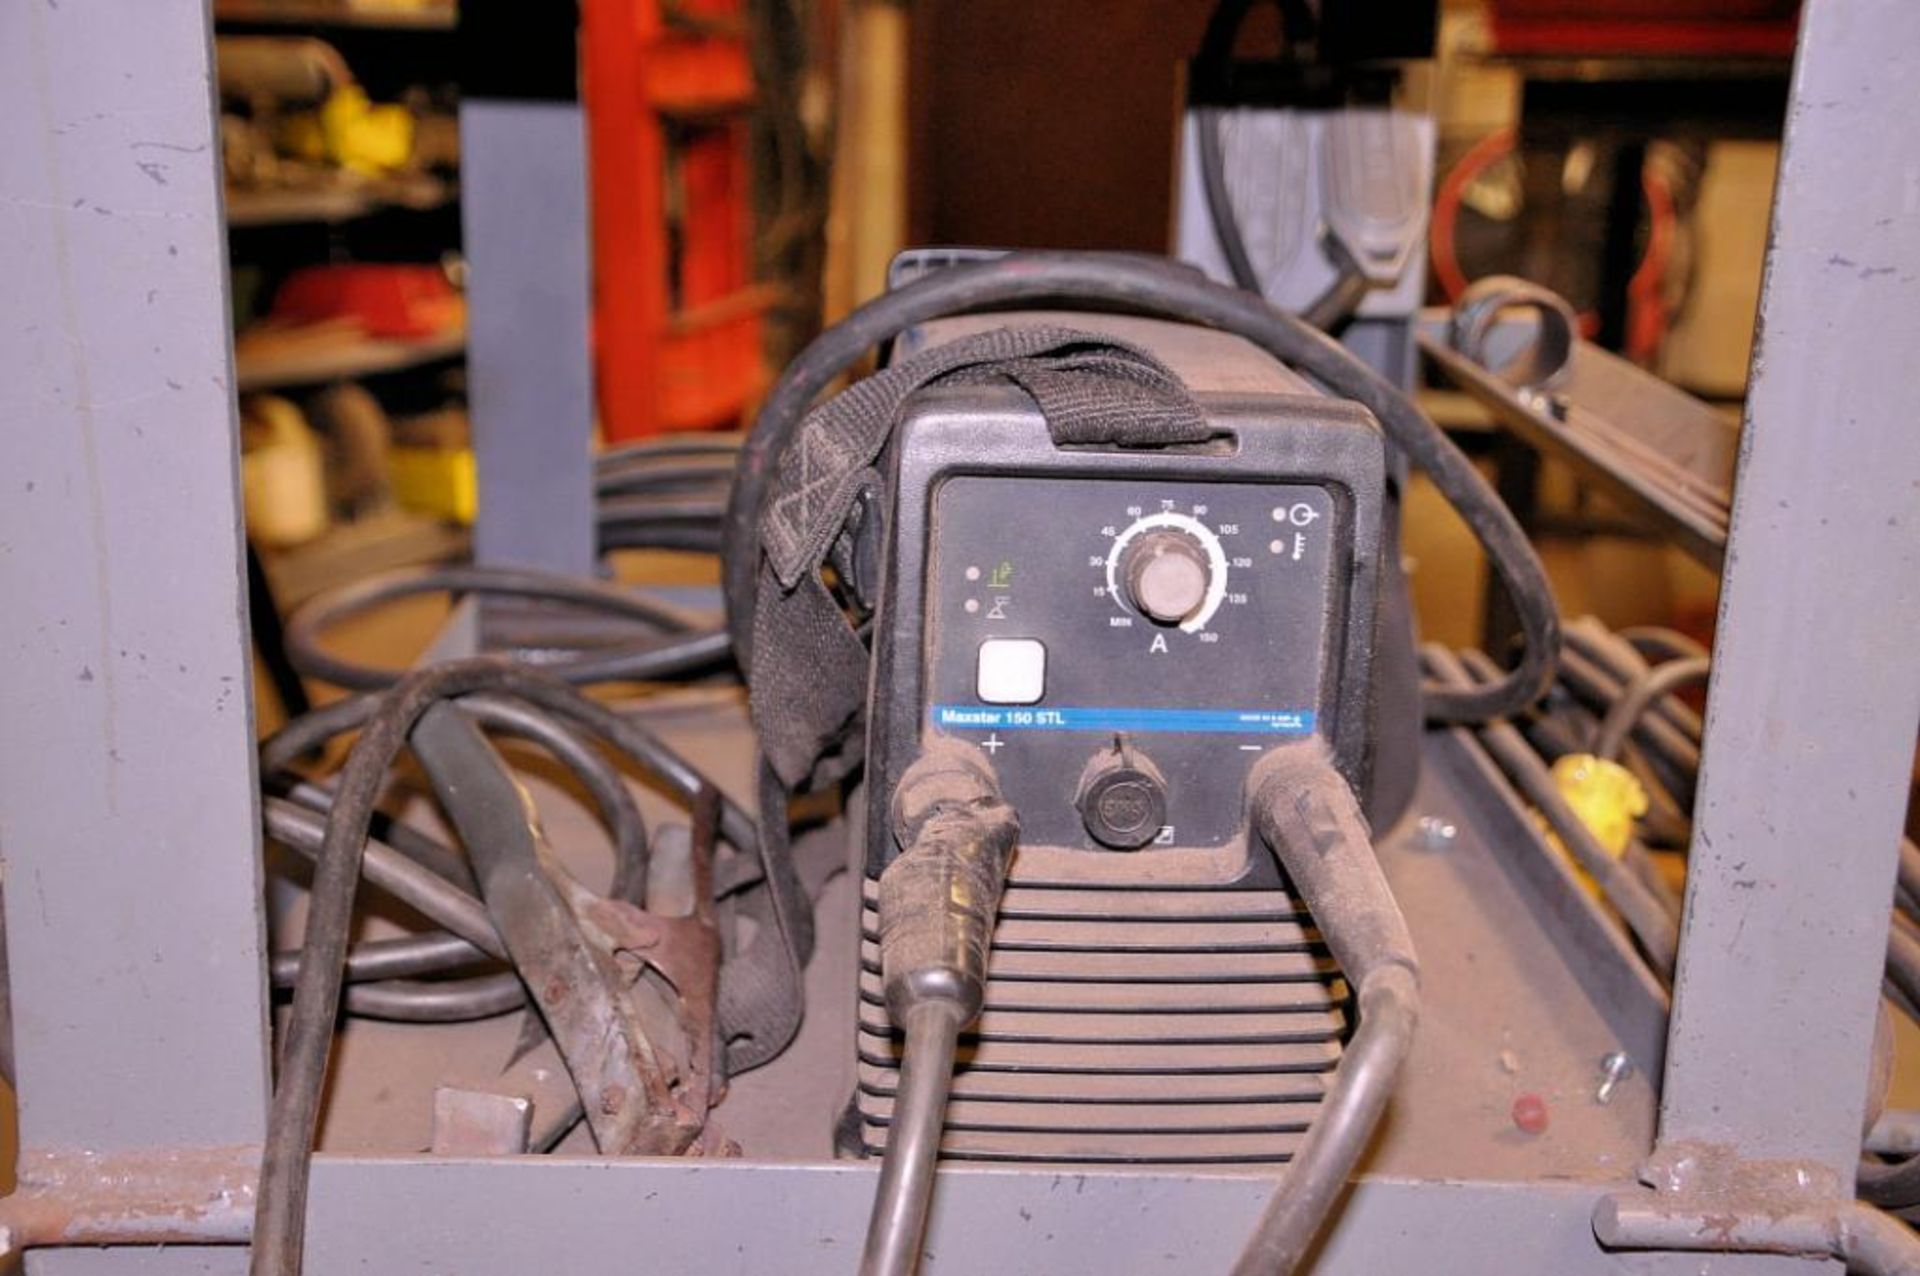 Miller MaxStar Model 150-STL Portable Tig/Stick Welder with Wilton 4-1/2 in. Bench Vise and Cart - Image 2 of 2